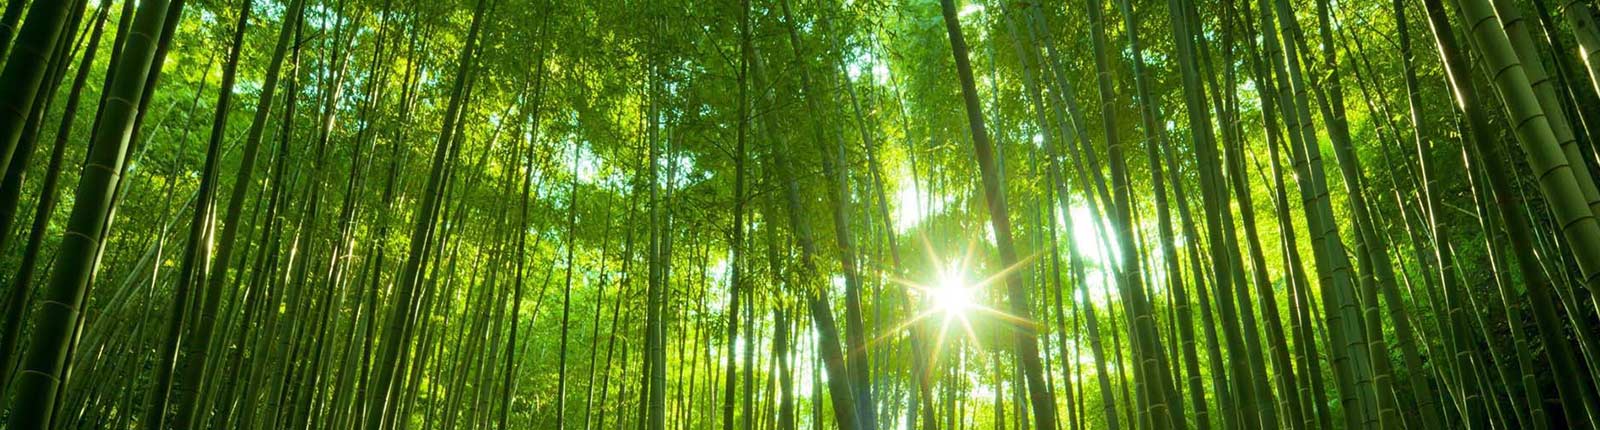 Bamboo: Africa's untapped potential